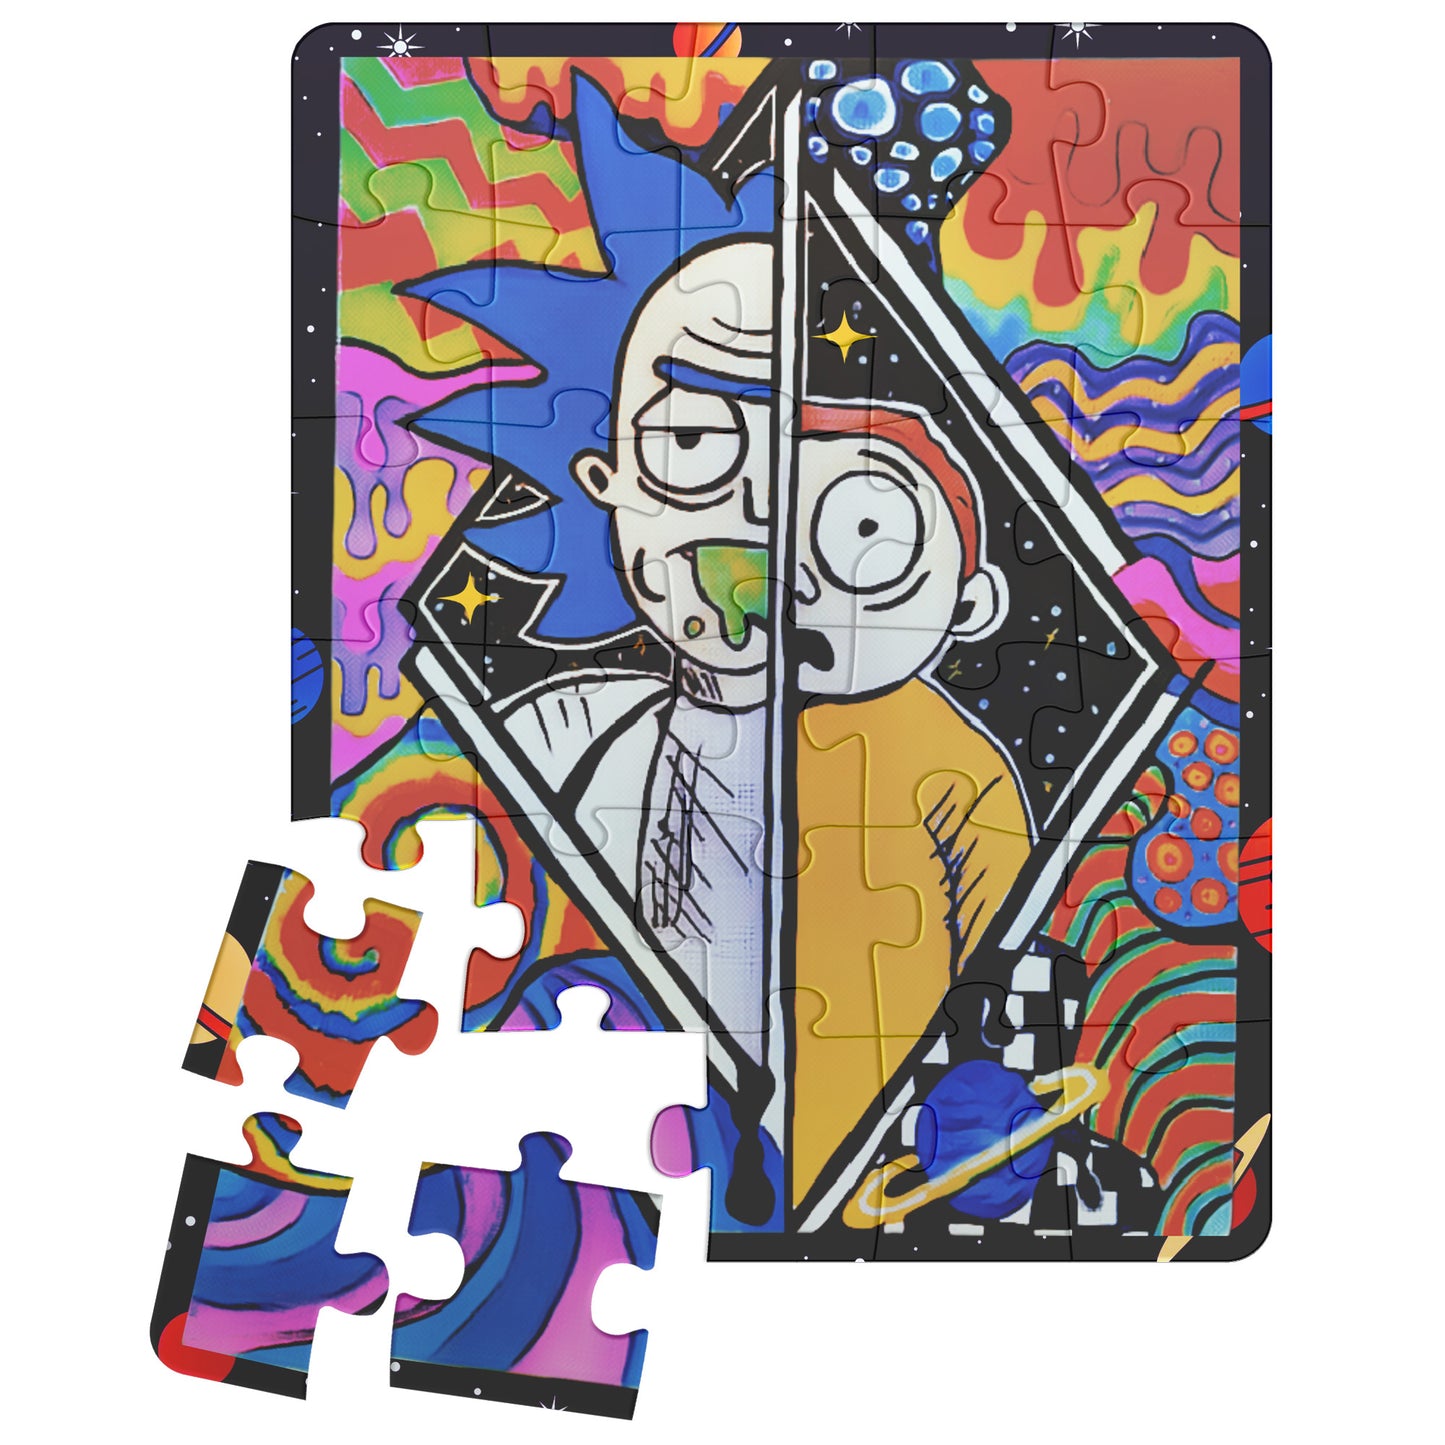 Rick and Morty Pyschedelic Trippy Art Portal Galaxy Puzzle